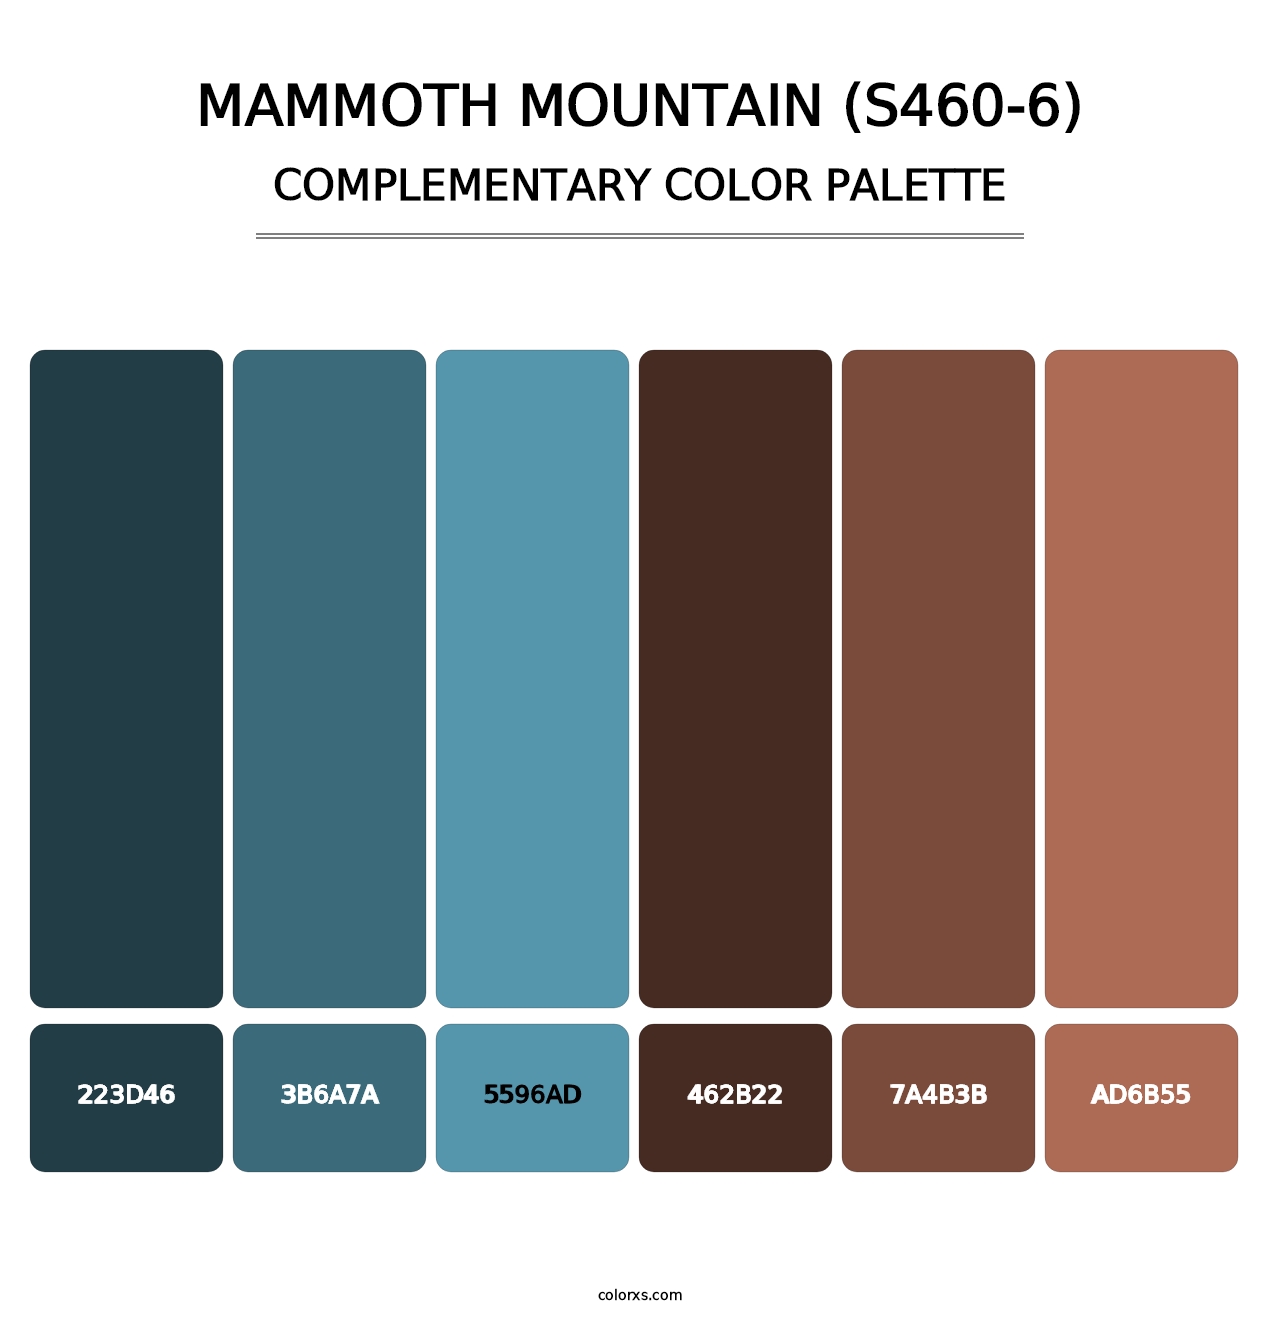 Mammoth Mountain (S460-6) - Complementary Color Palette